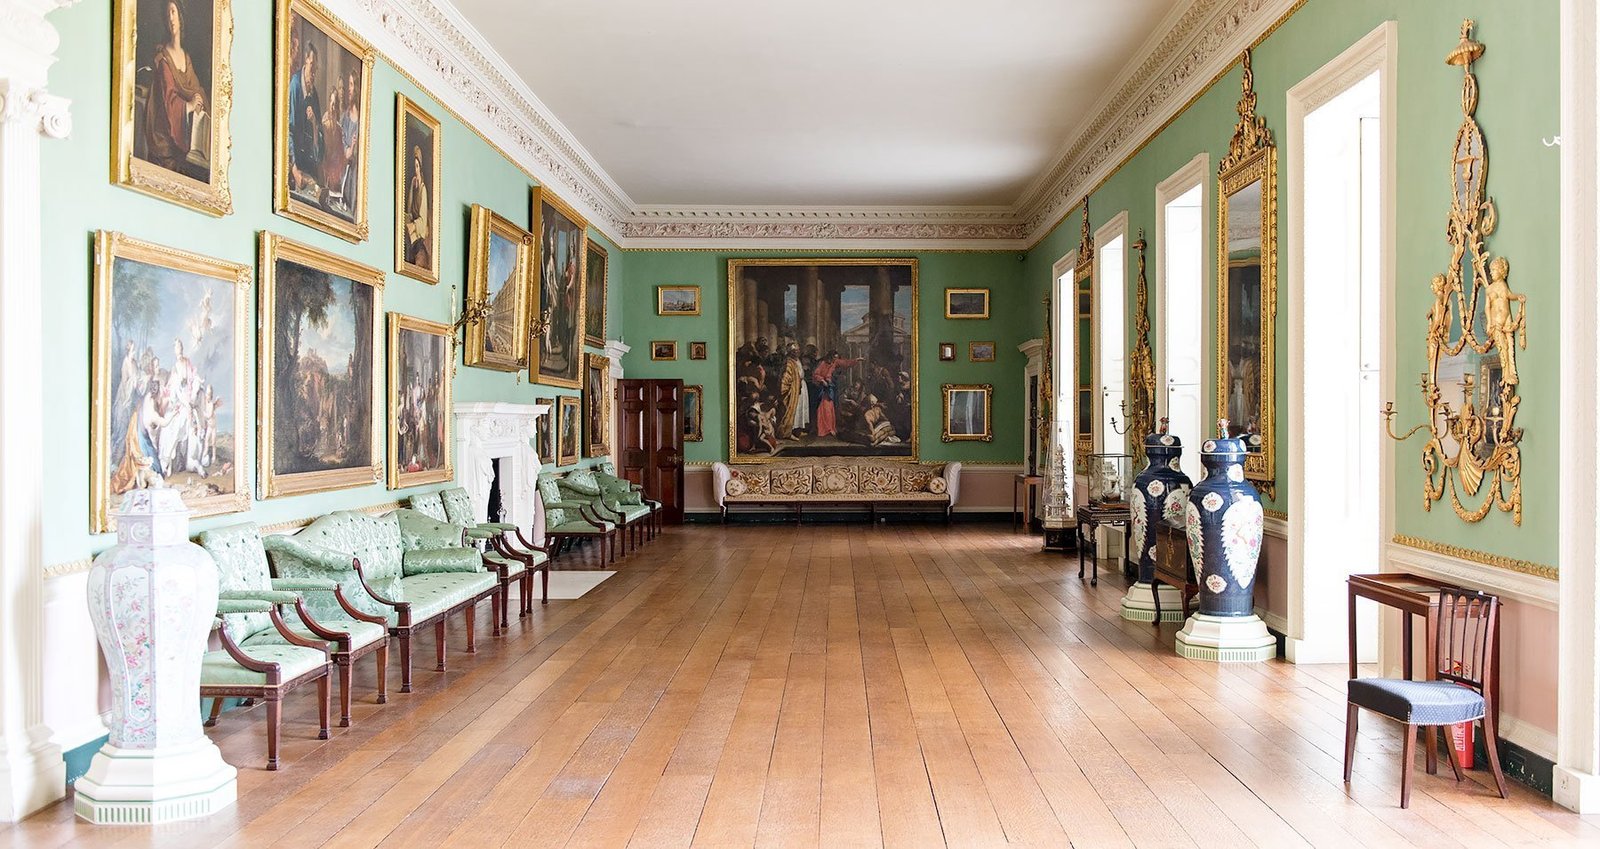 Step into 18th century London at Osterley Park, a historic mansion in London.